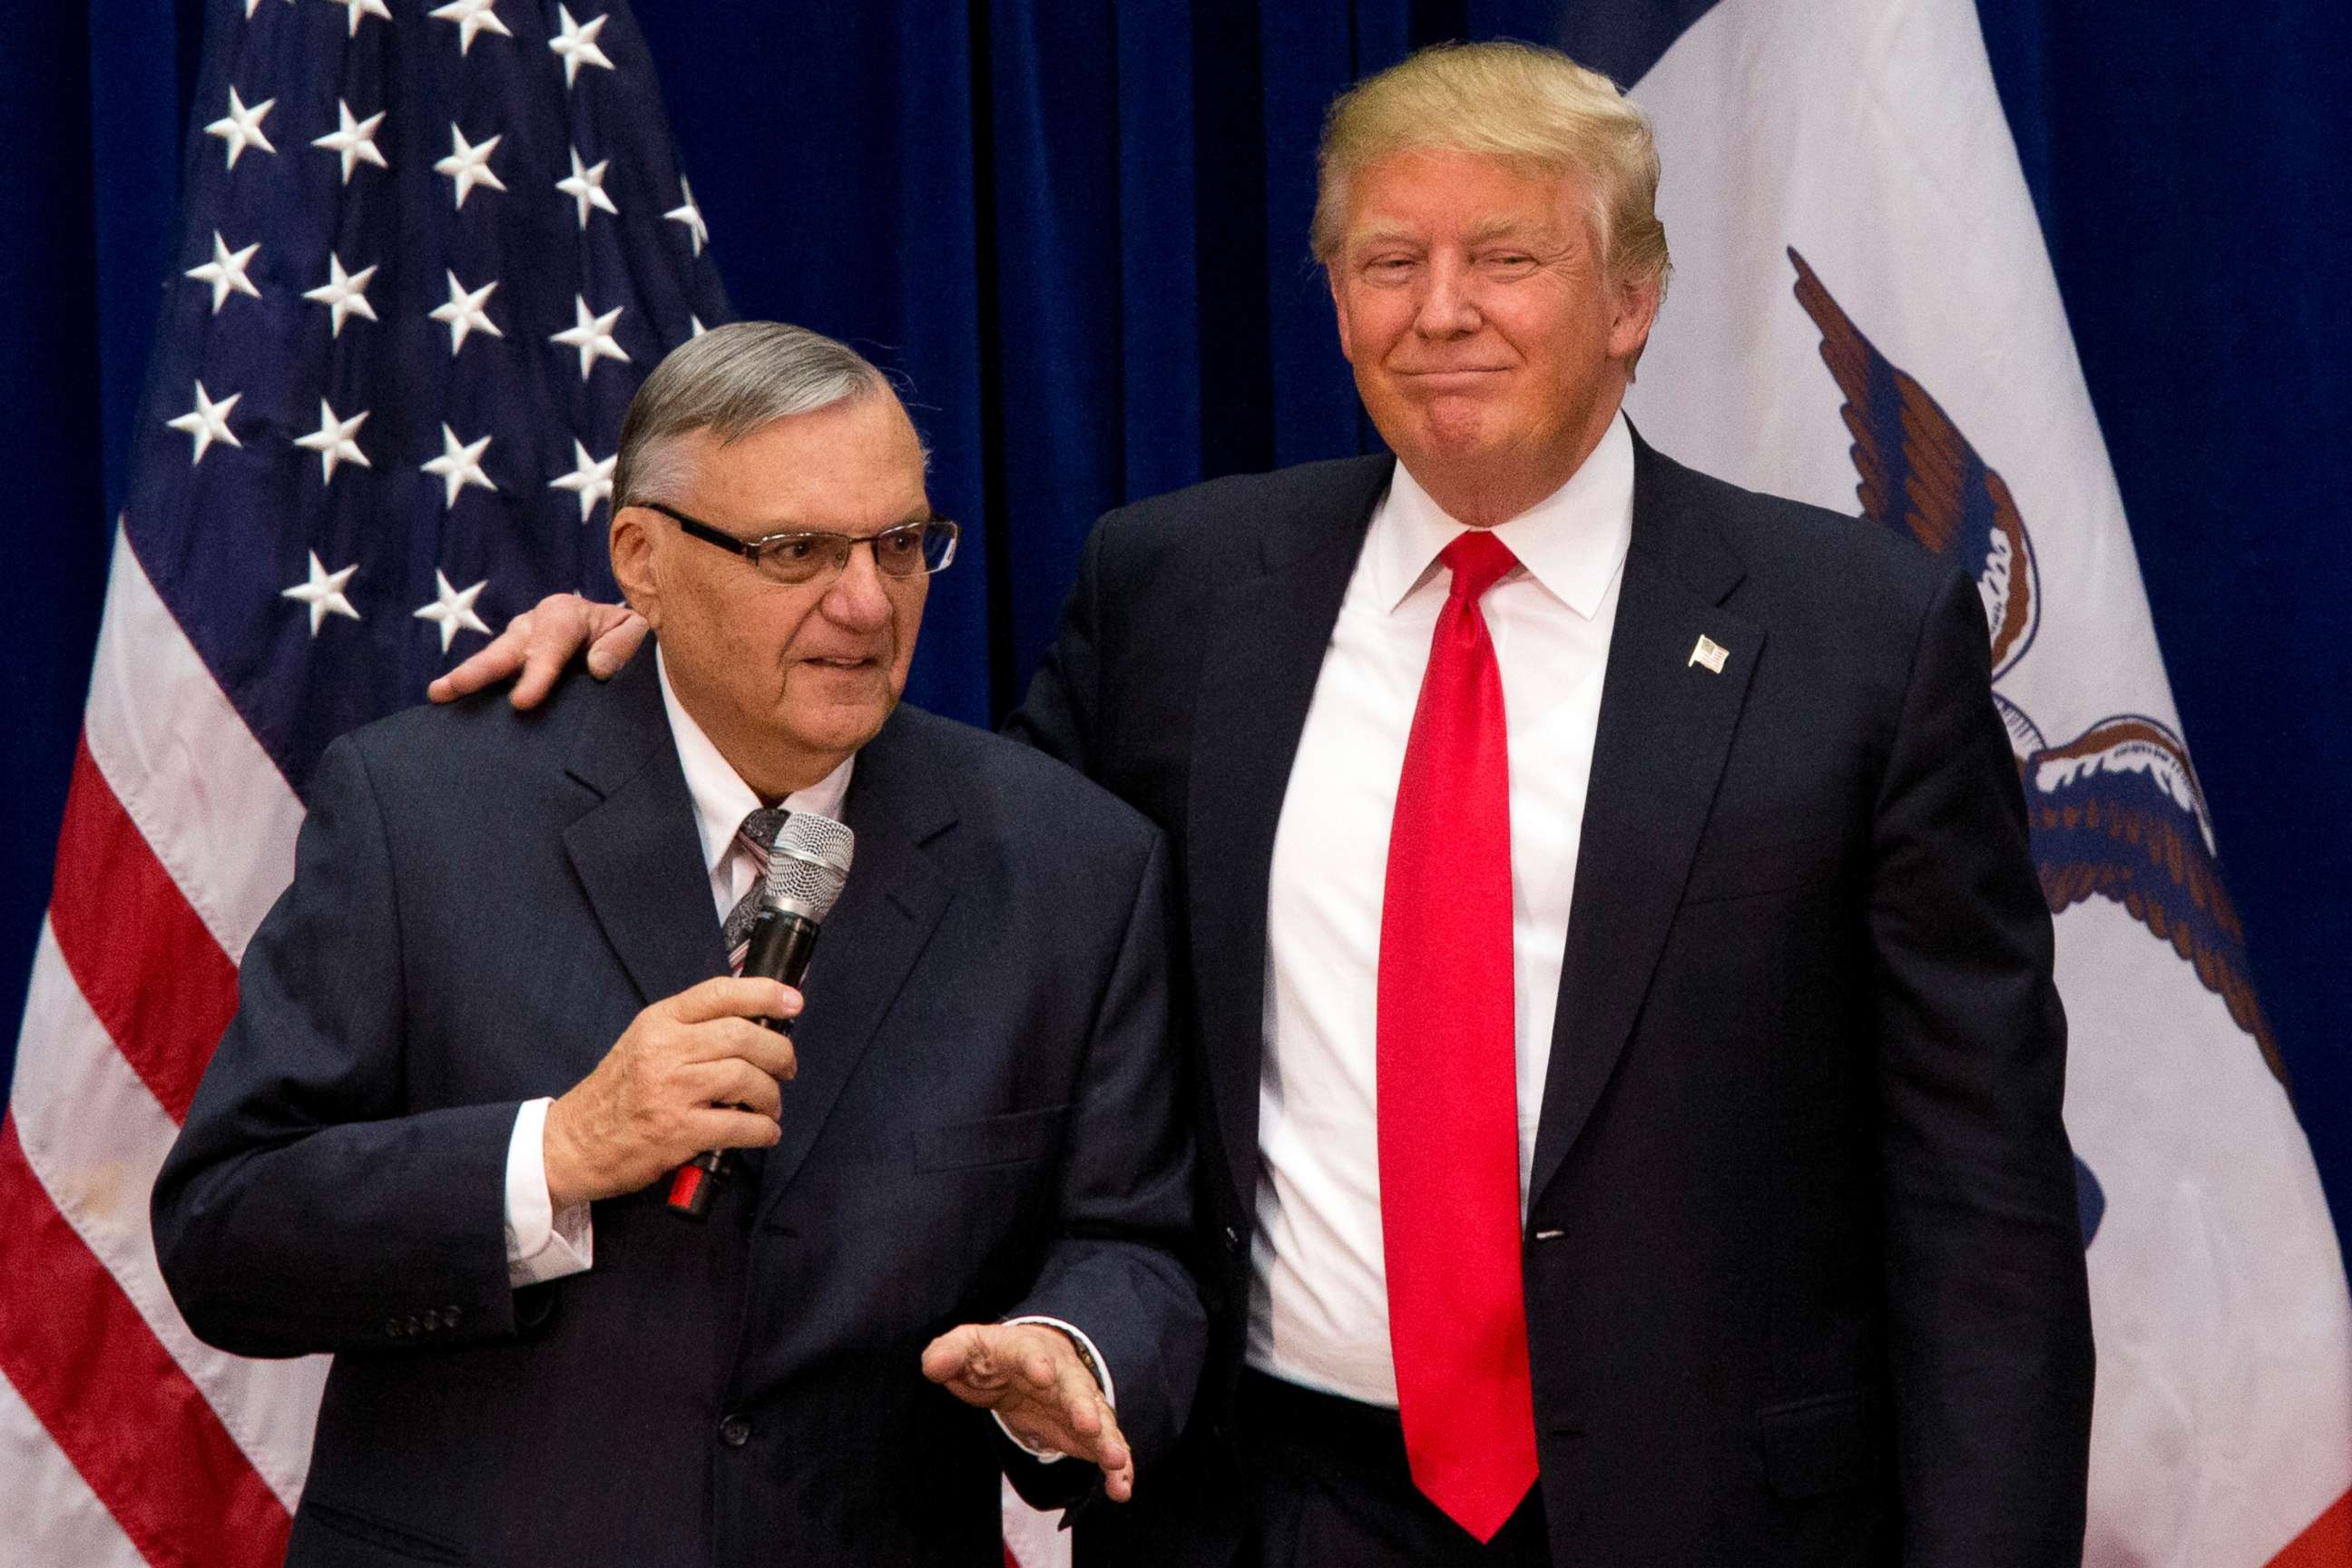 PHOTO: In this Jan. 26, 2016, file photo, then-Republican presidential candidate Donald Trump is joined by Joe Arpaio at a campaign event in Marshalltown, Iowa. 